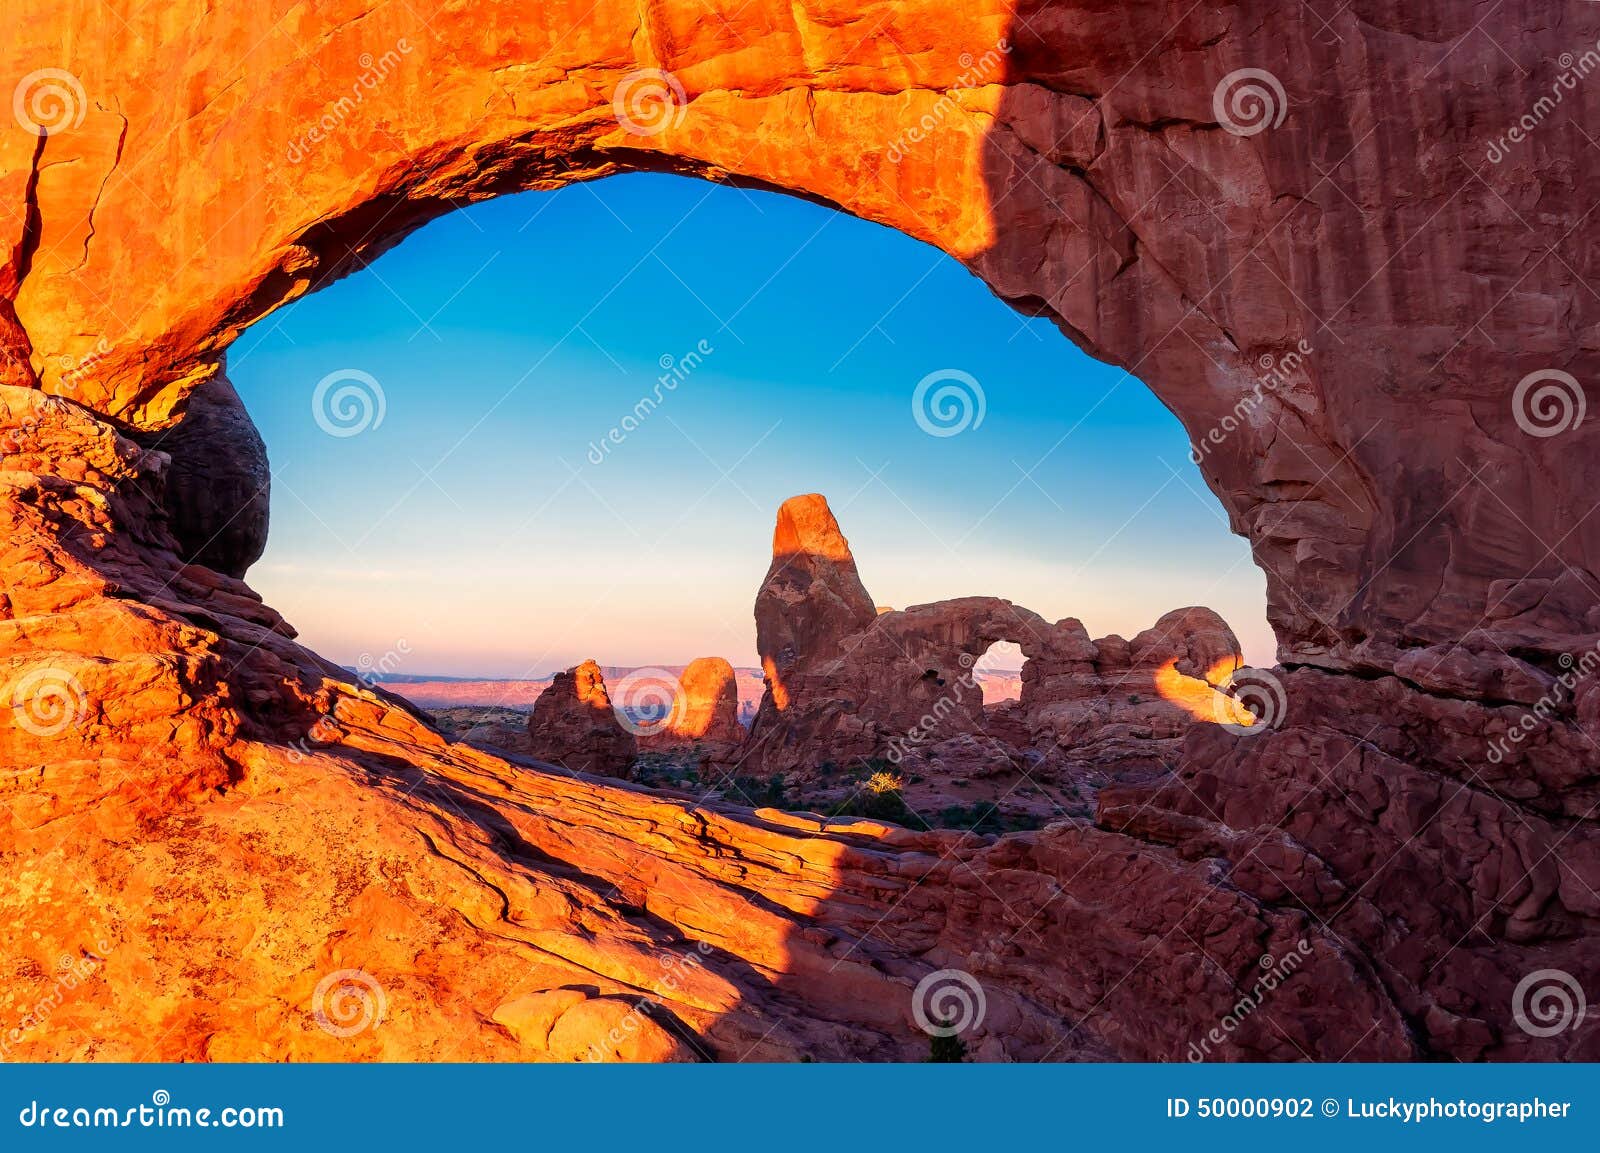 turret arch through the north window at sunrise in arches national park near moab, utah